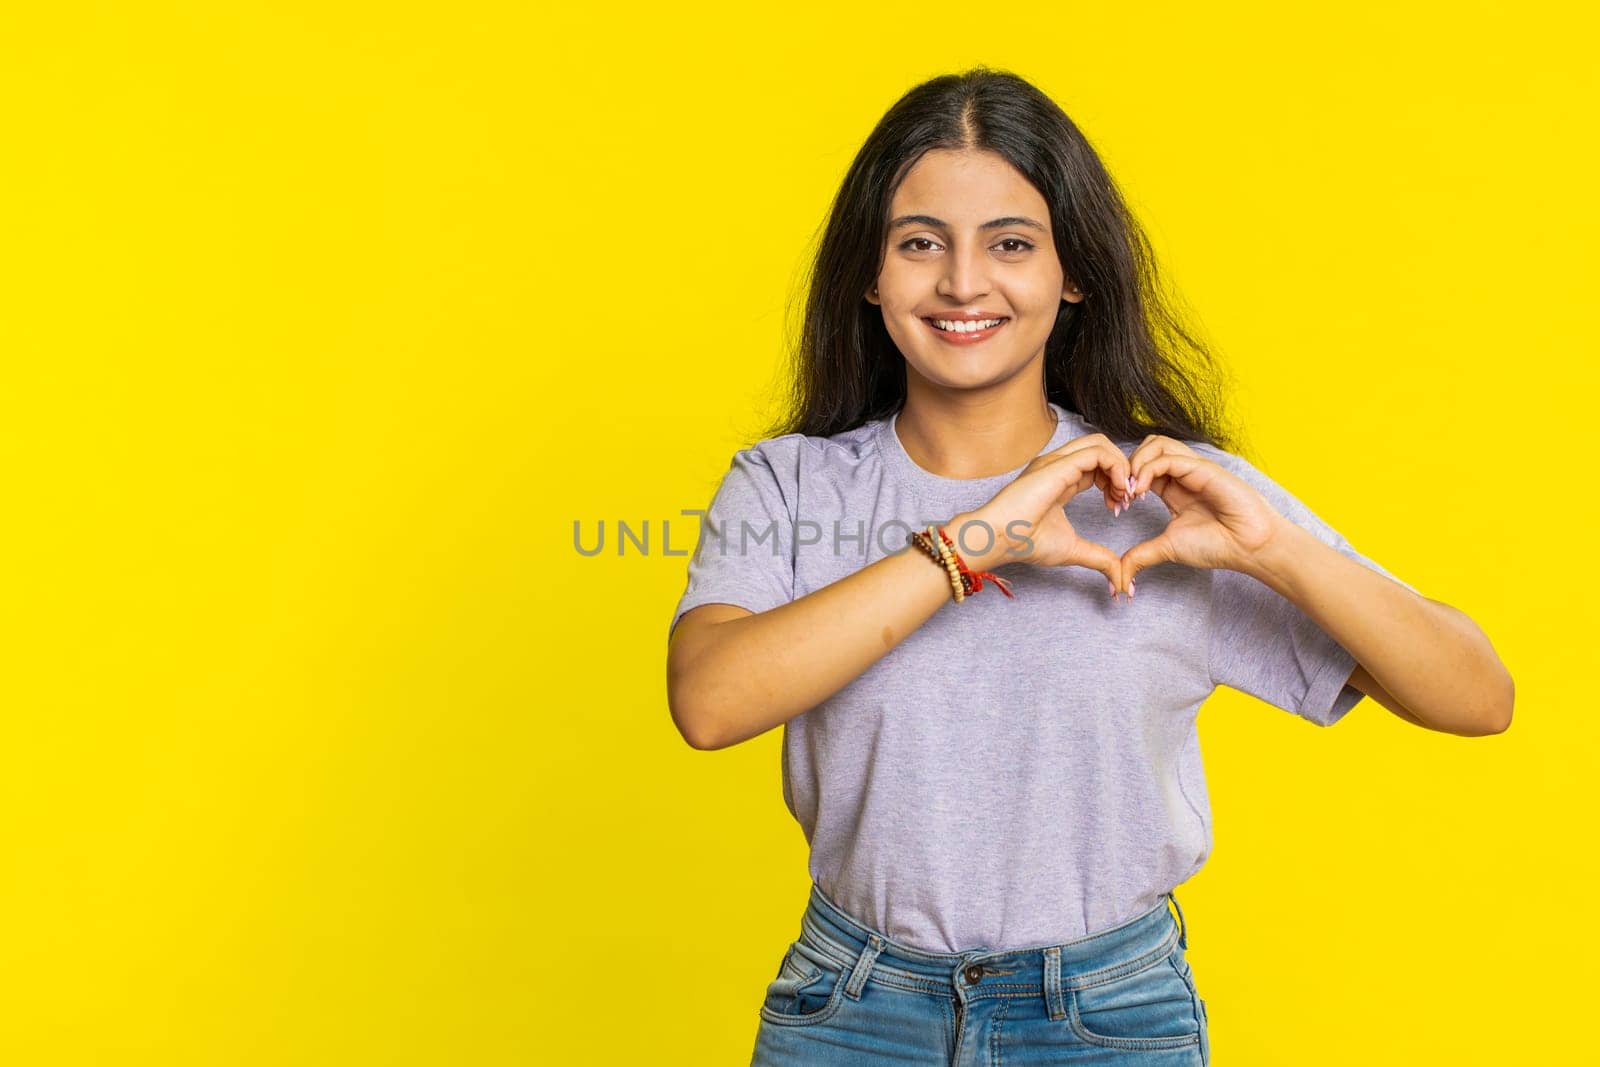 Woman in love. Smiling attractive Indian woman makes heart gesture demonstrates love sign expresses good positive feelings and sympathy. Arabian Hindu young girl isolated on yellow wall background